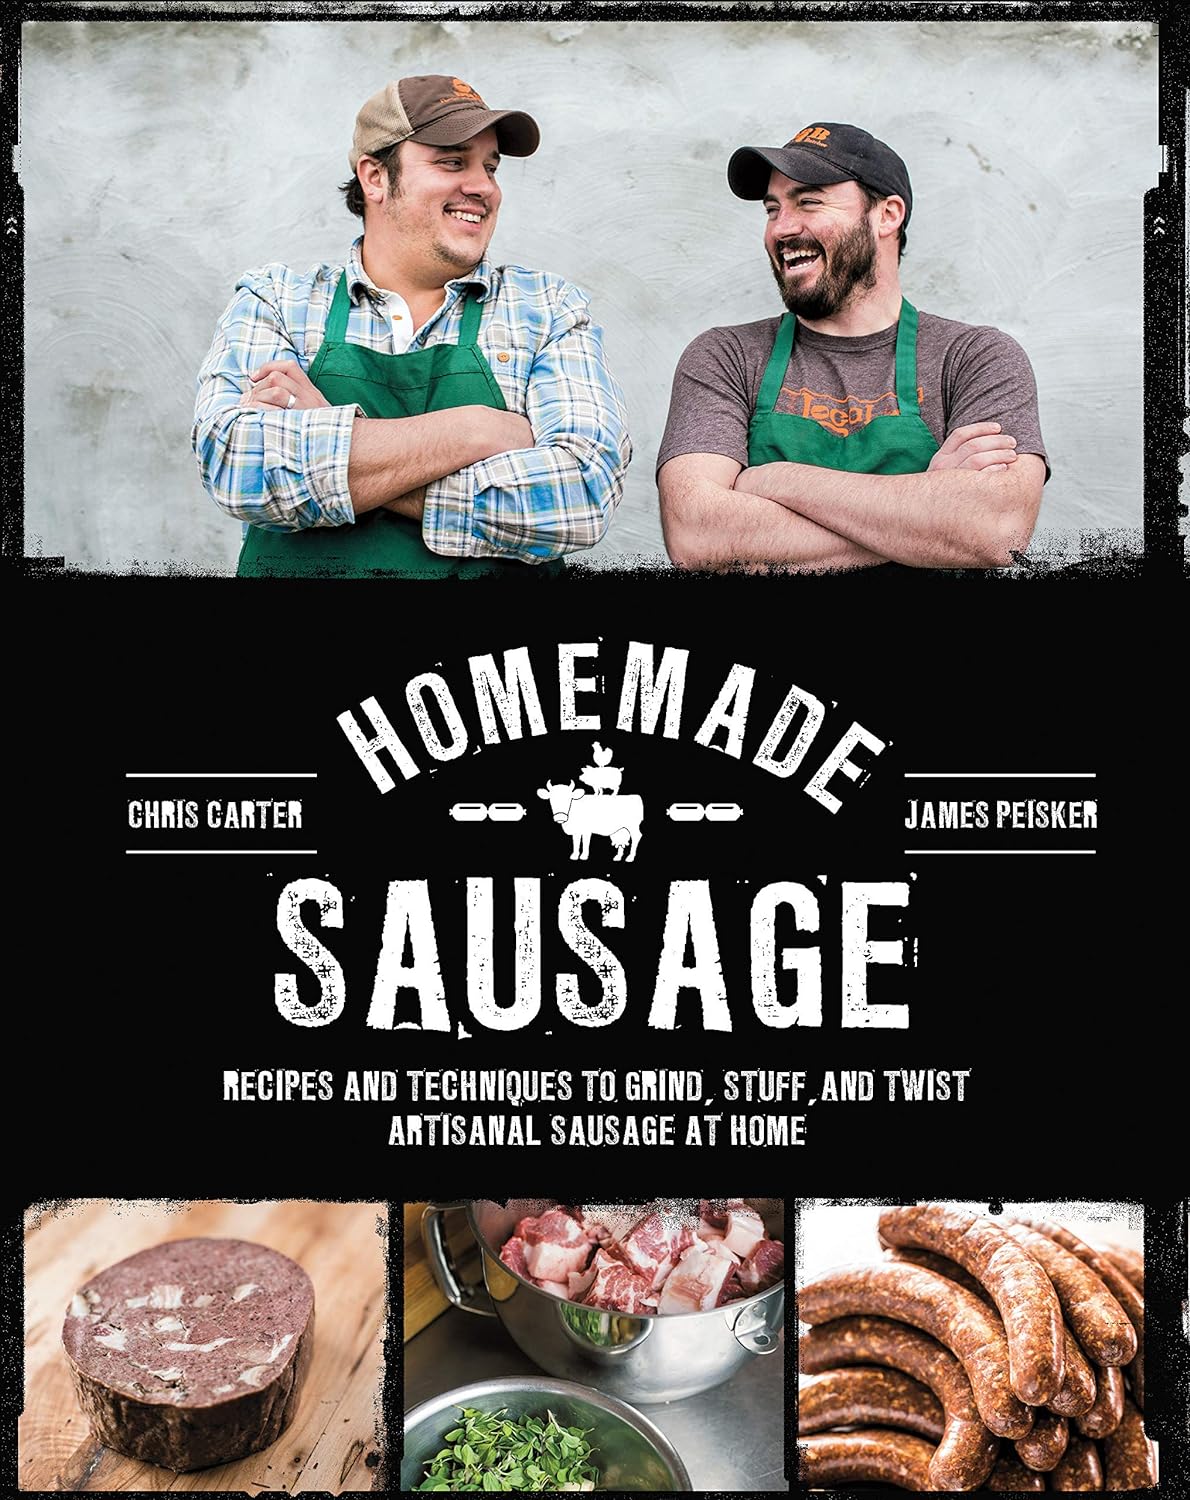 Homemade Sausage: Recipes and Techniques to Grind, Stuff, and Twist Artisanal Sausage at Home (James Peisker, Chris Carter)